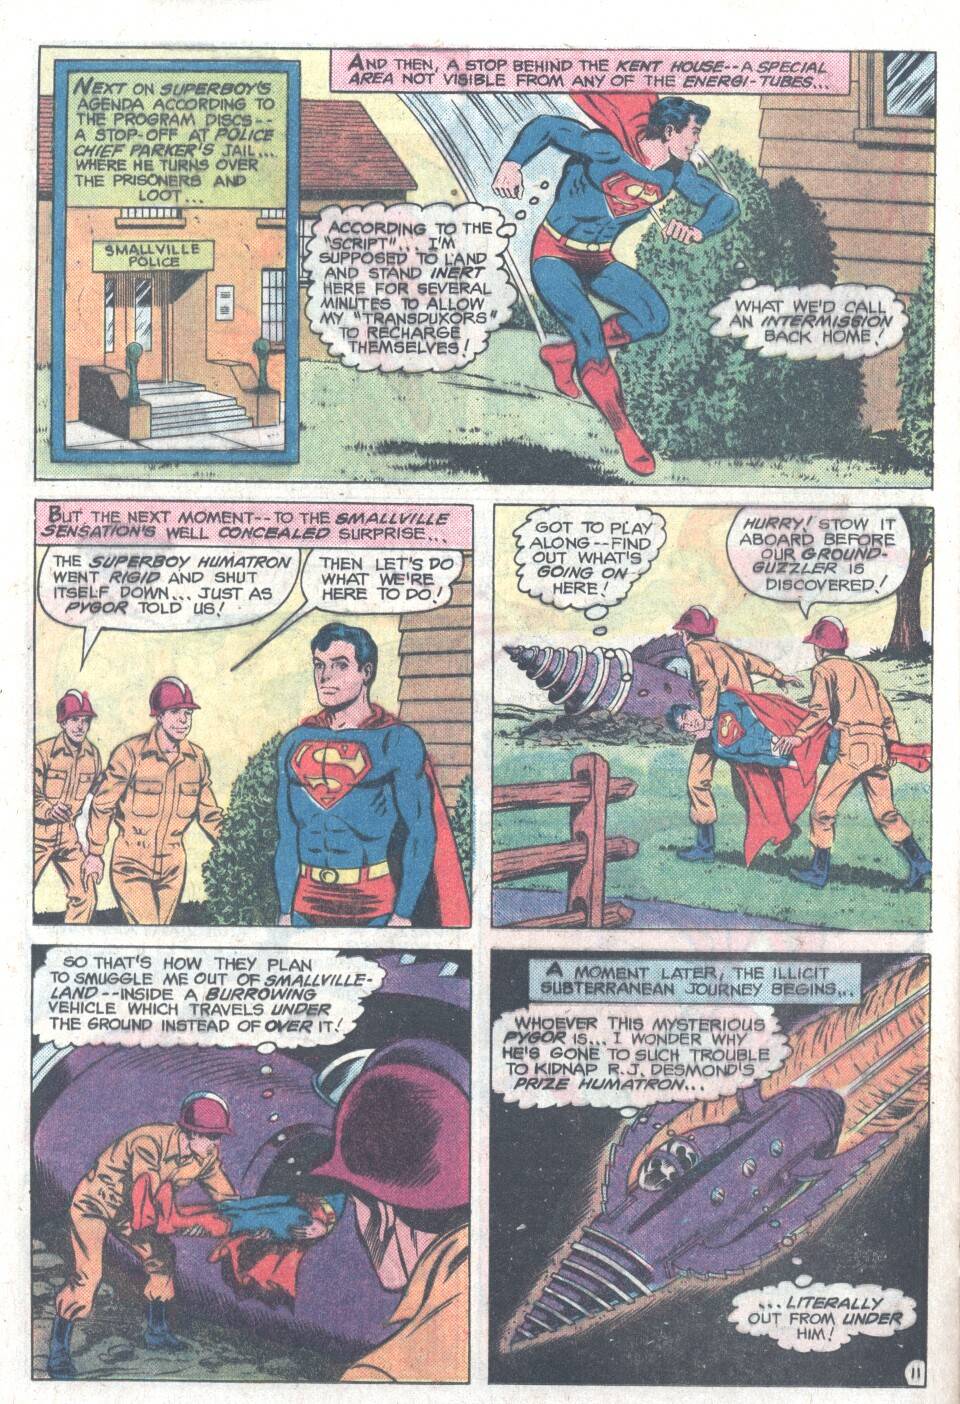 The New Adventures of Superboy 10 Page 11